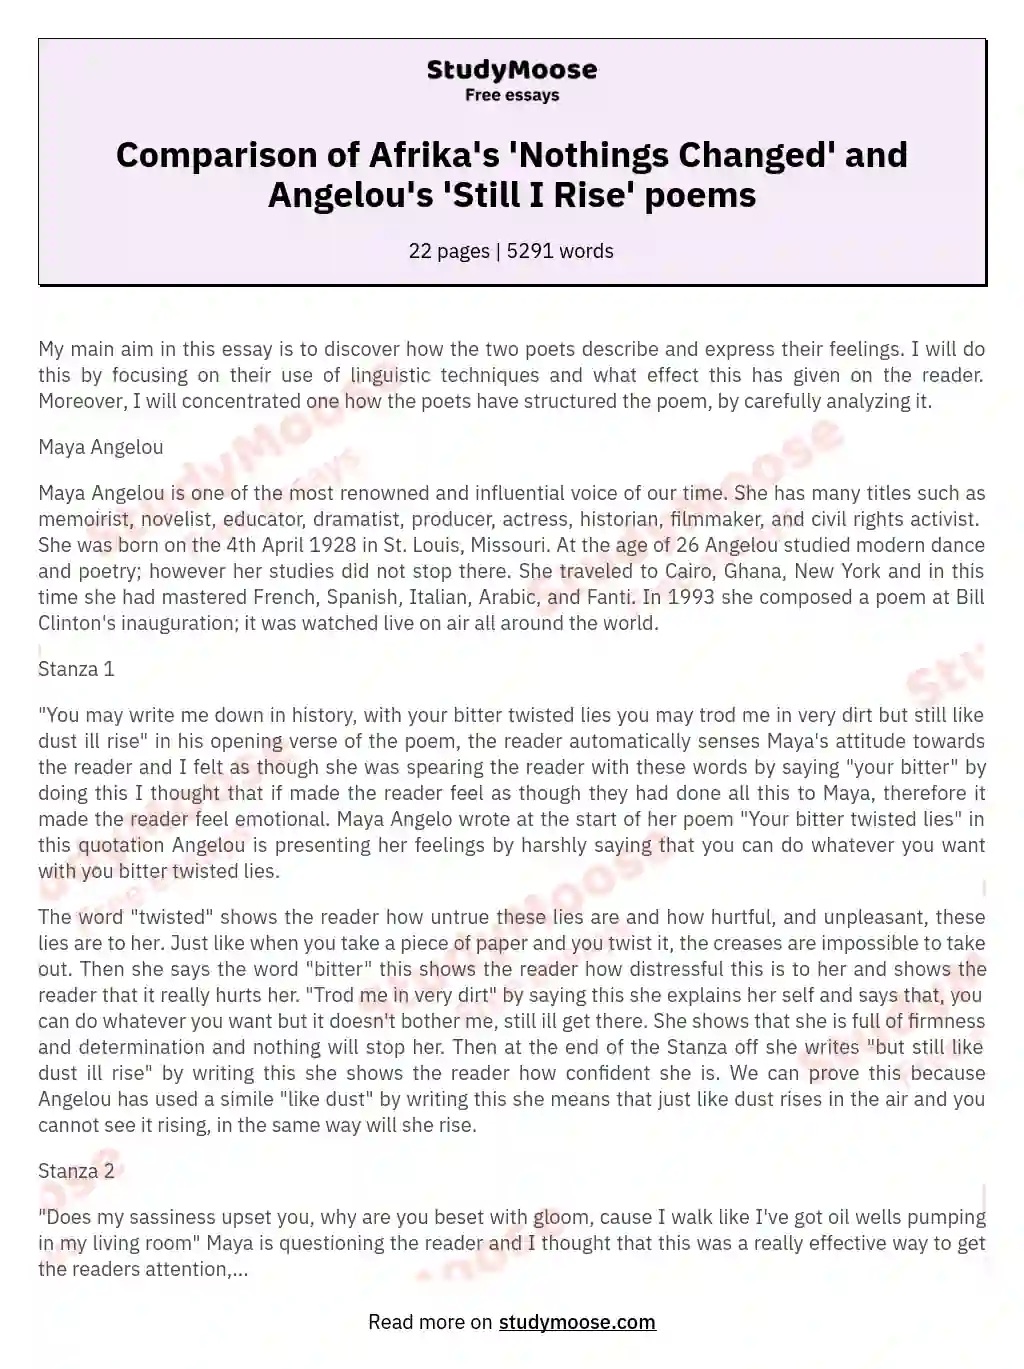 Comparison of Afrika's 'Nothings Changed' and Angelou's 'Still I Rise' poems essay